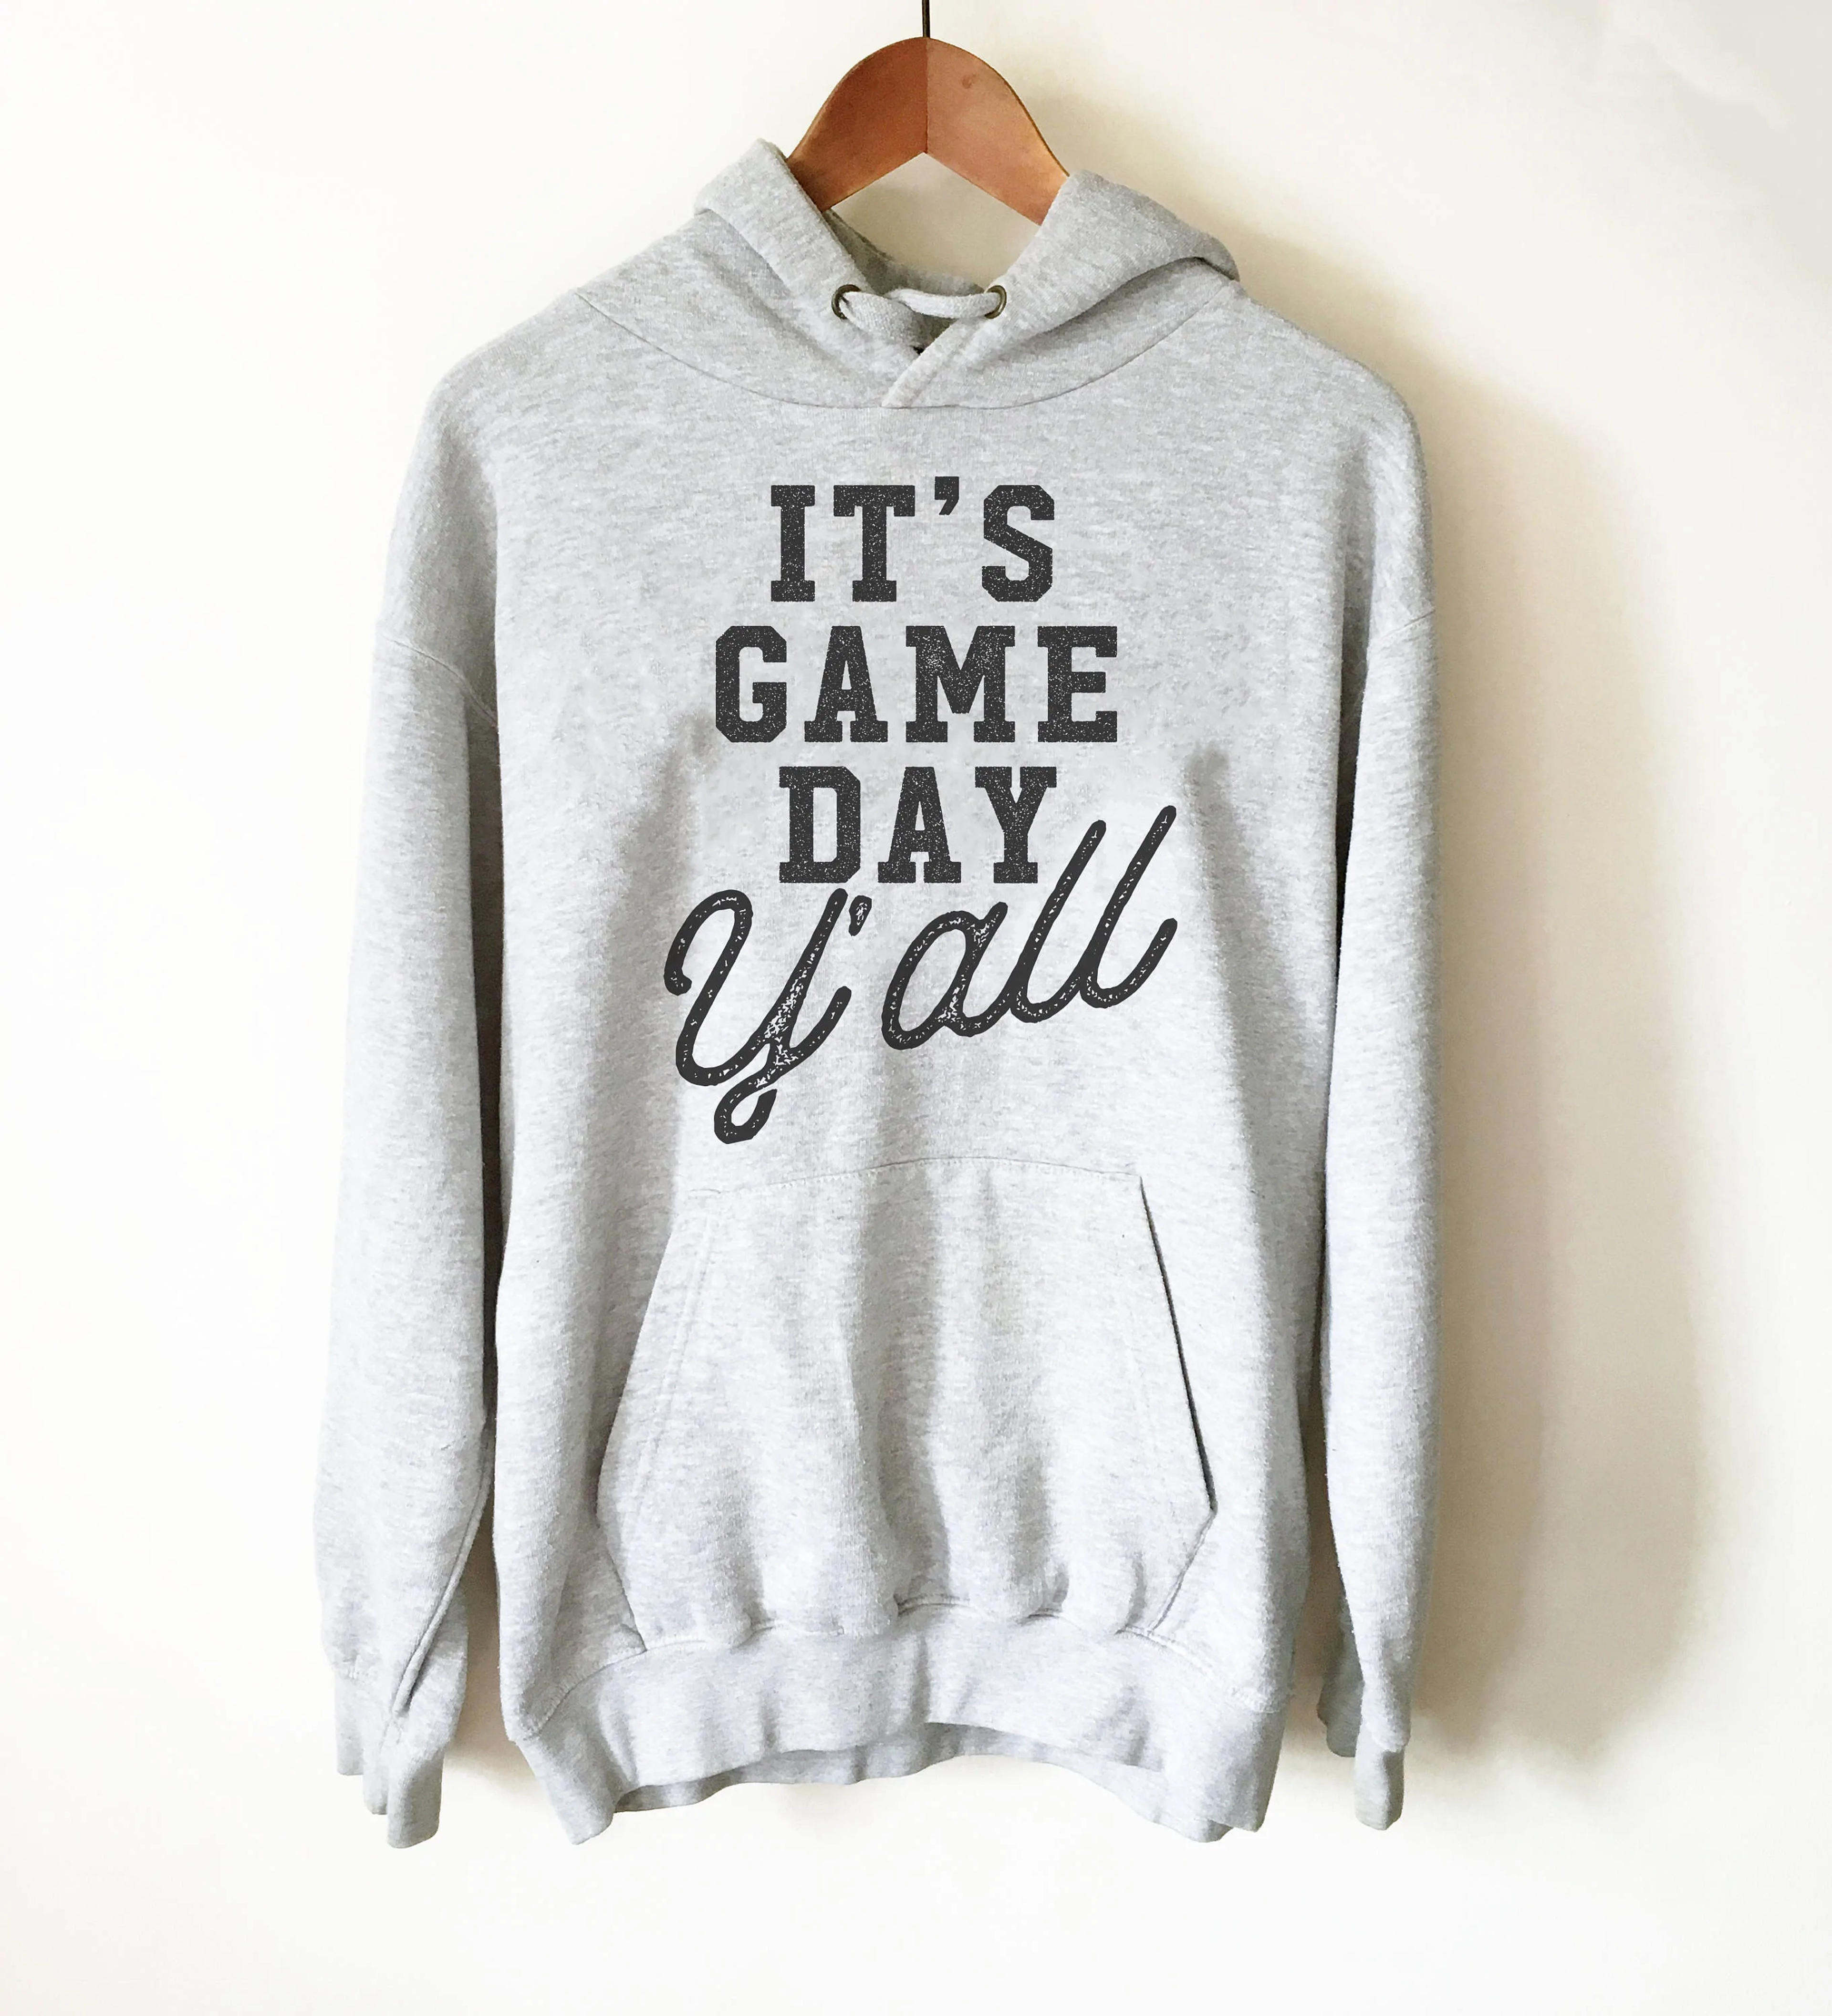 It's Game Day Y'all Hoodie - Game Day Shirt, Football Shirt, Tailgatin